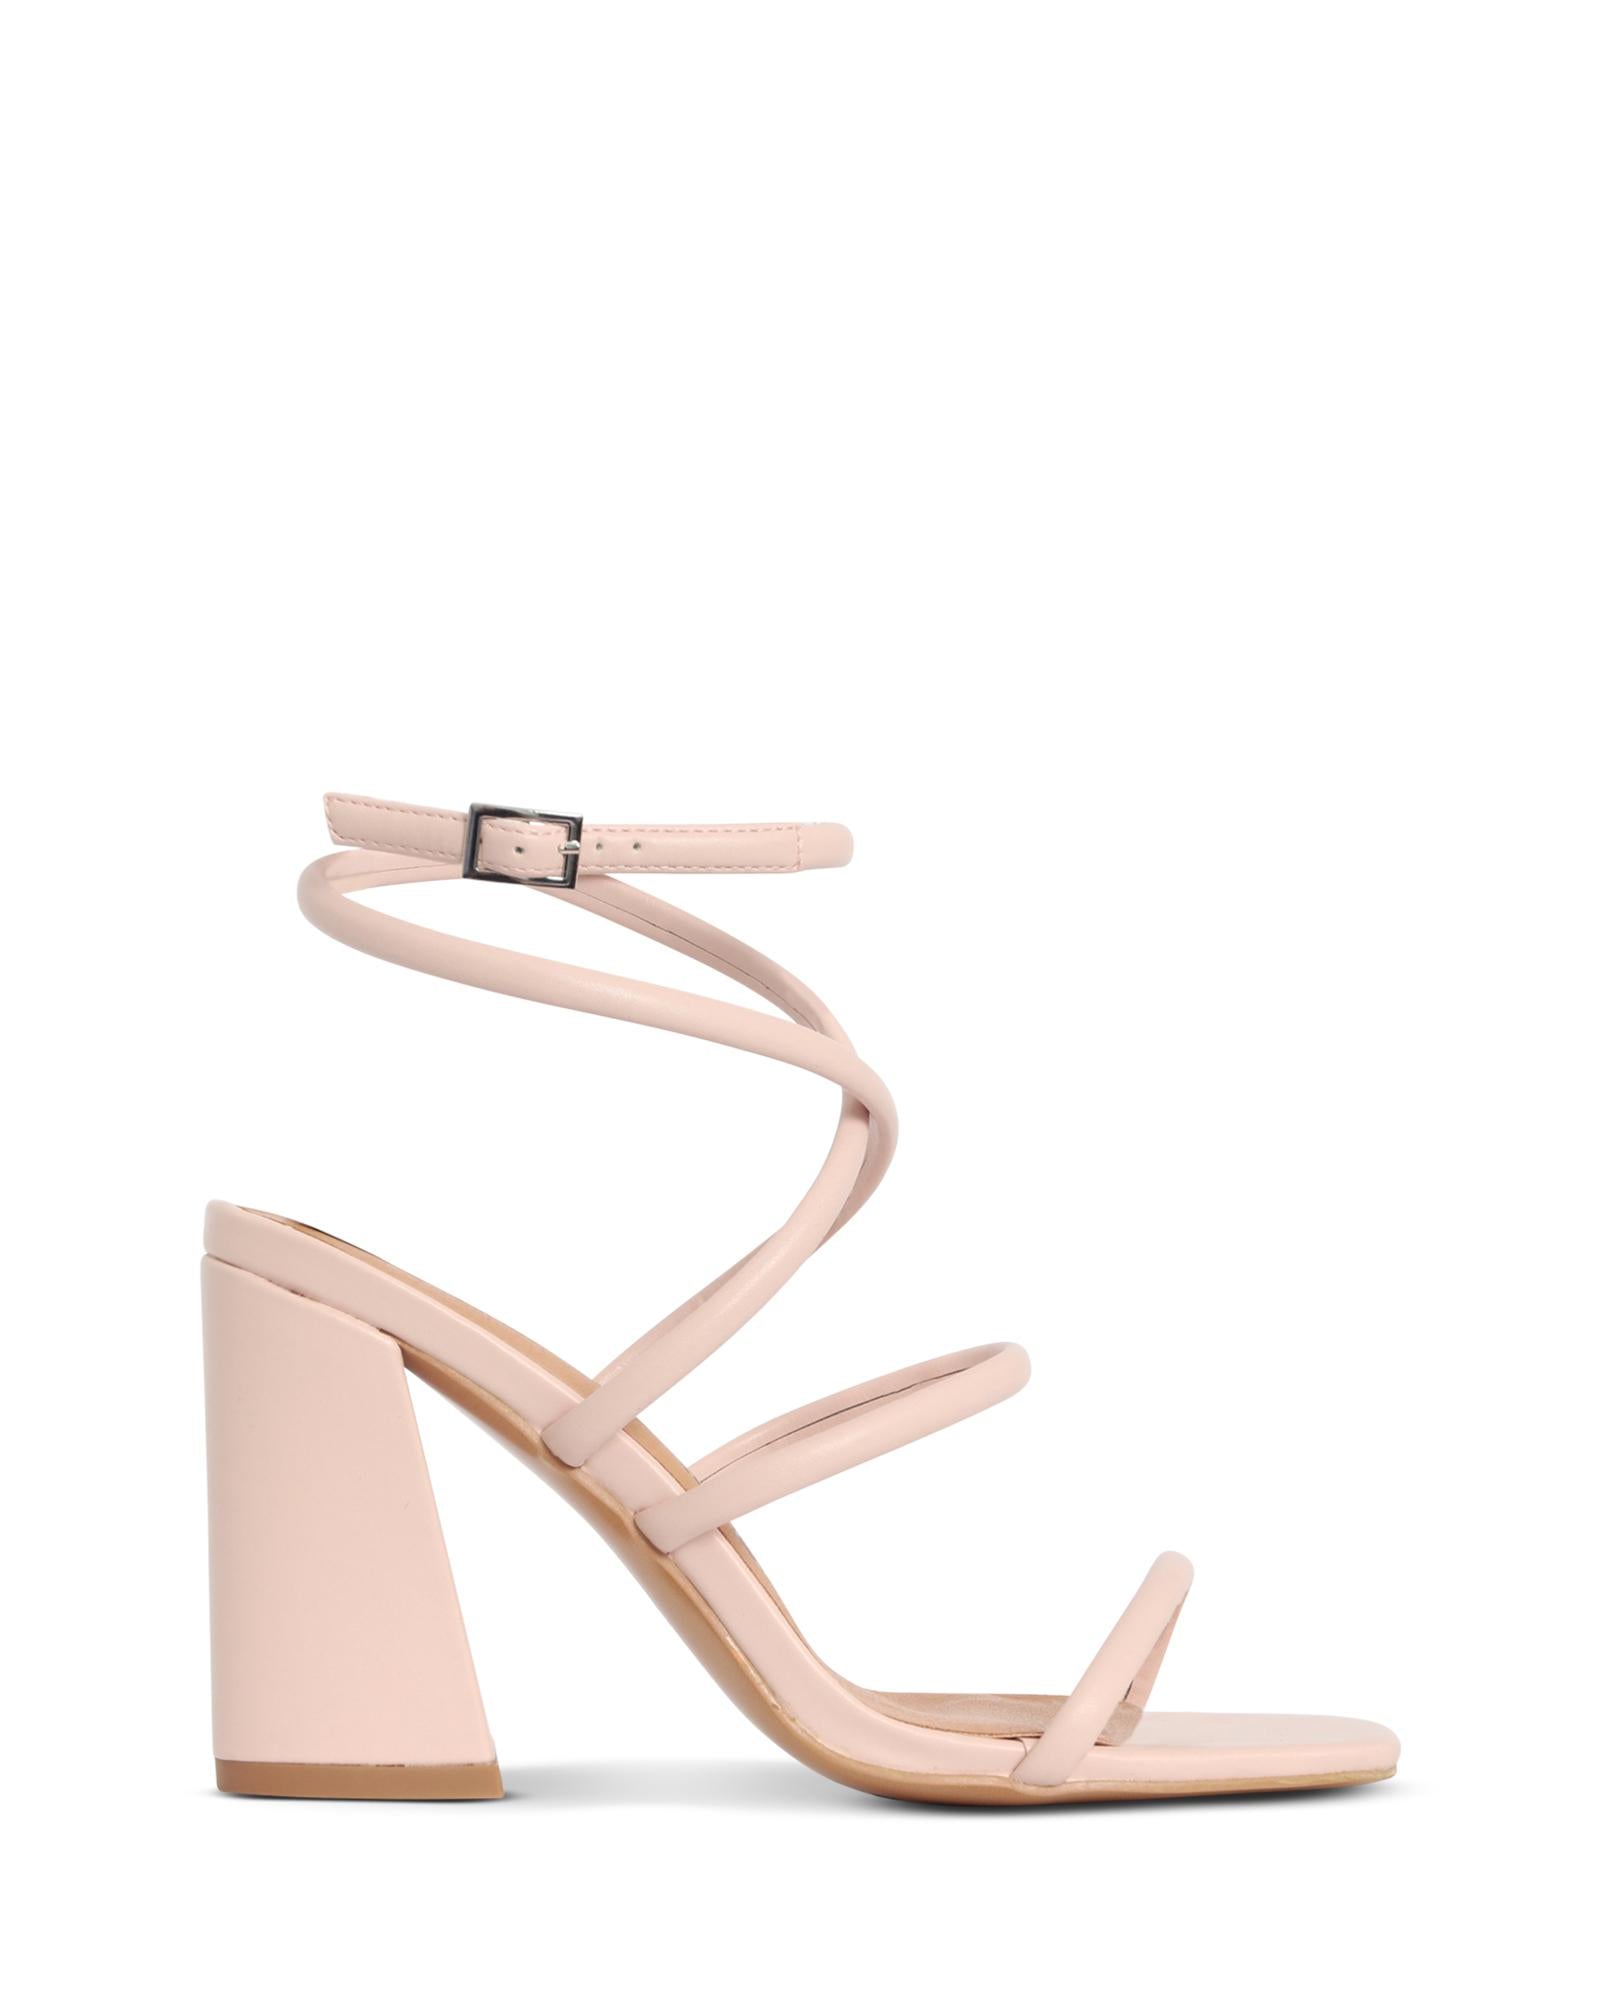 Seville Blush 9.5cm Strappy Heel with Adjustable Buckle